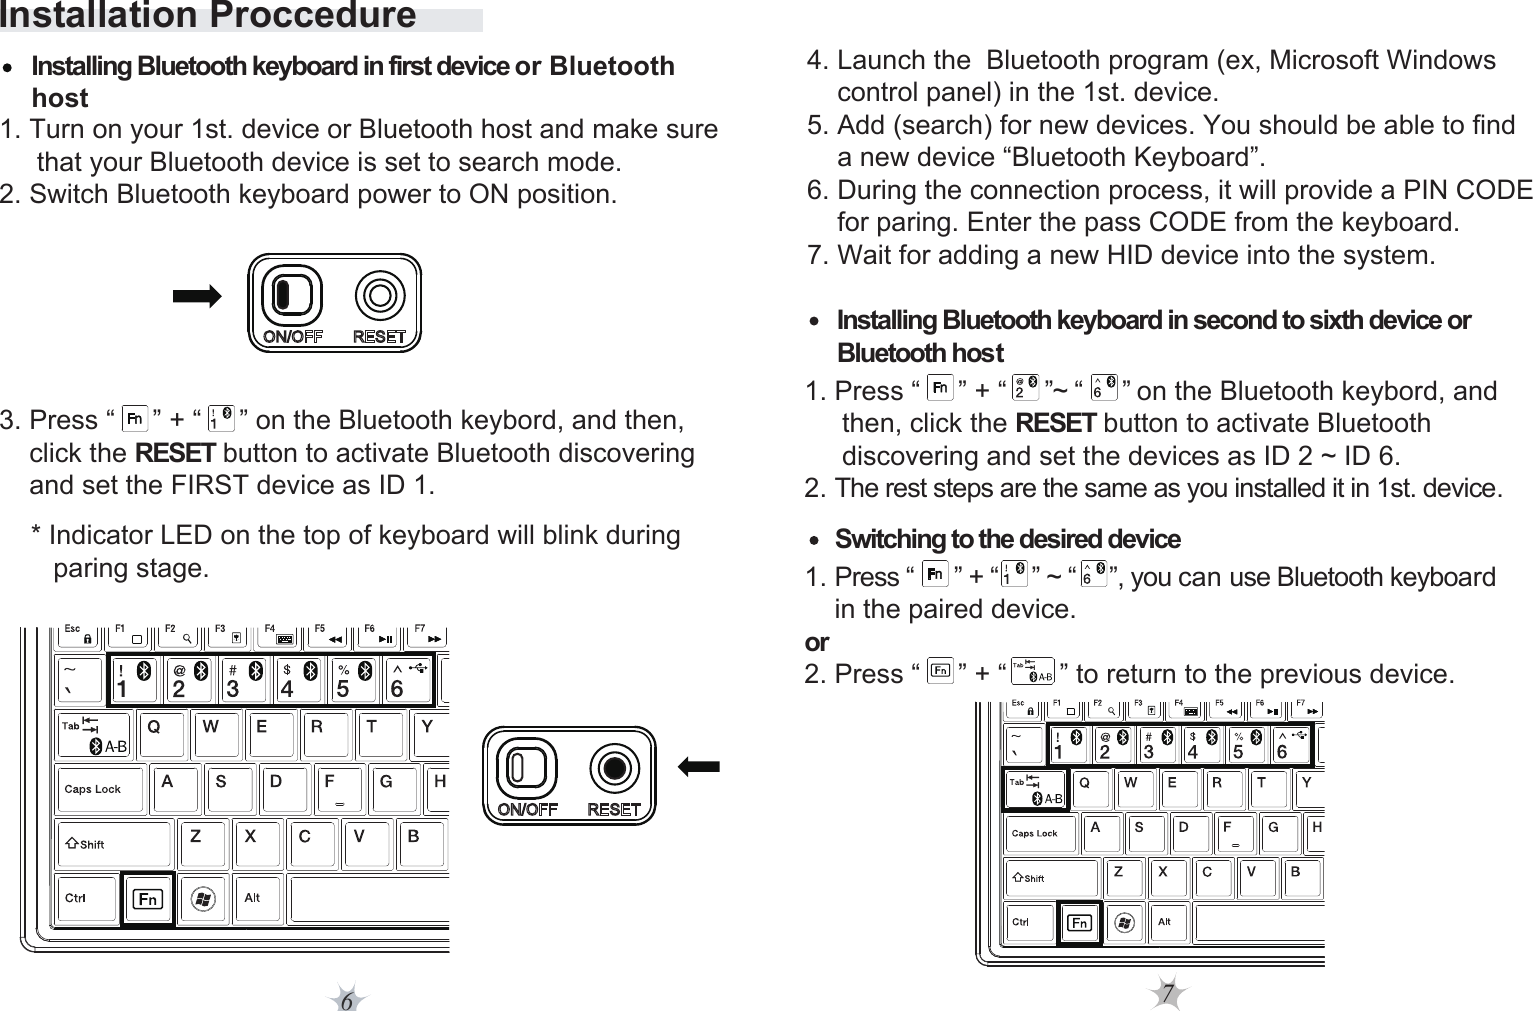 7Installation Proccedure6* Indicator LED on the top of keyboard will blink during    paring stage. 4. Launch the  Bluetooth program (ex, Microsoft Windows     control panel) in the 1st. device. 5. Add (search) for new devices. You should be able to find     a new device “Bluetooth Keyboard”. 6. During the connection process, it will provide a PIN CODE     for paring. Enter the pass CODE from the keyboard.7. Wait for adding a new HID device into the system.Installing Bluetooth keyboard in second to sixth device or Bluetooth hostSwitching to the desired deviceInstalling Bluetooth keyboard in first device or Bluetooth host  1. Turn on your 1st. device or Bluetooth host and make sure      that your Bluetooth device is set to search mode. 2. Switch Bluetooth keyboard power to ON position.  1. Press “      ” + “     ” ~ “     ”, you can use Bluetooth keyboard     in the paired device.or 2. Press “     ” + “       ” to return to the previous device.3. Press “     ” + “     ” on the Bluetooth keybord, and then,     click the RESET button to activate Bluetooth discovering     and set the FIRST device as ID 1.  1. Press “     ” + “     ”~ “      ” on the Bluetooth keybord, and      then, click the RESET button to activate Bluetooth      discovering and set the devices as ID 2 ~ ID 6.2. The rest steps are the same as you installed it in 1st. device.           